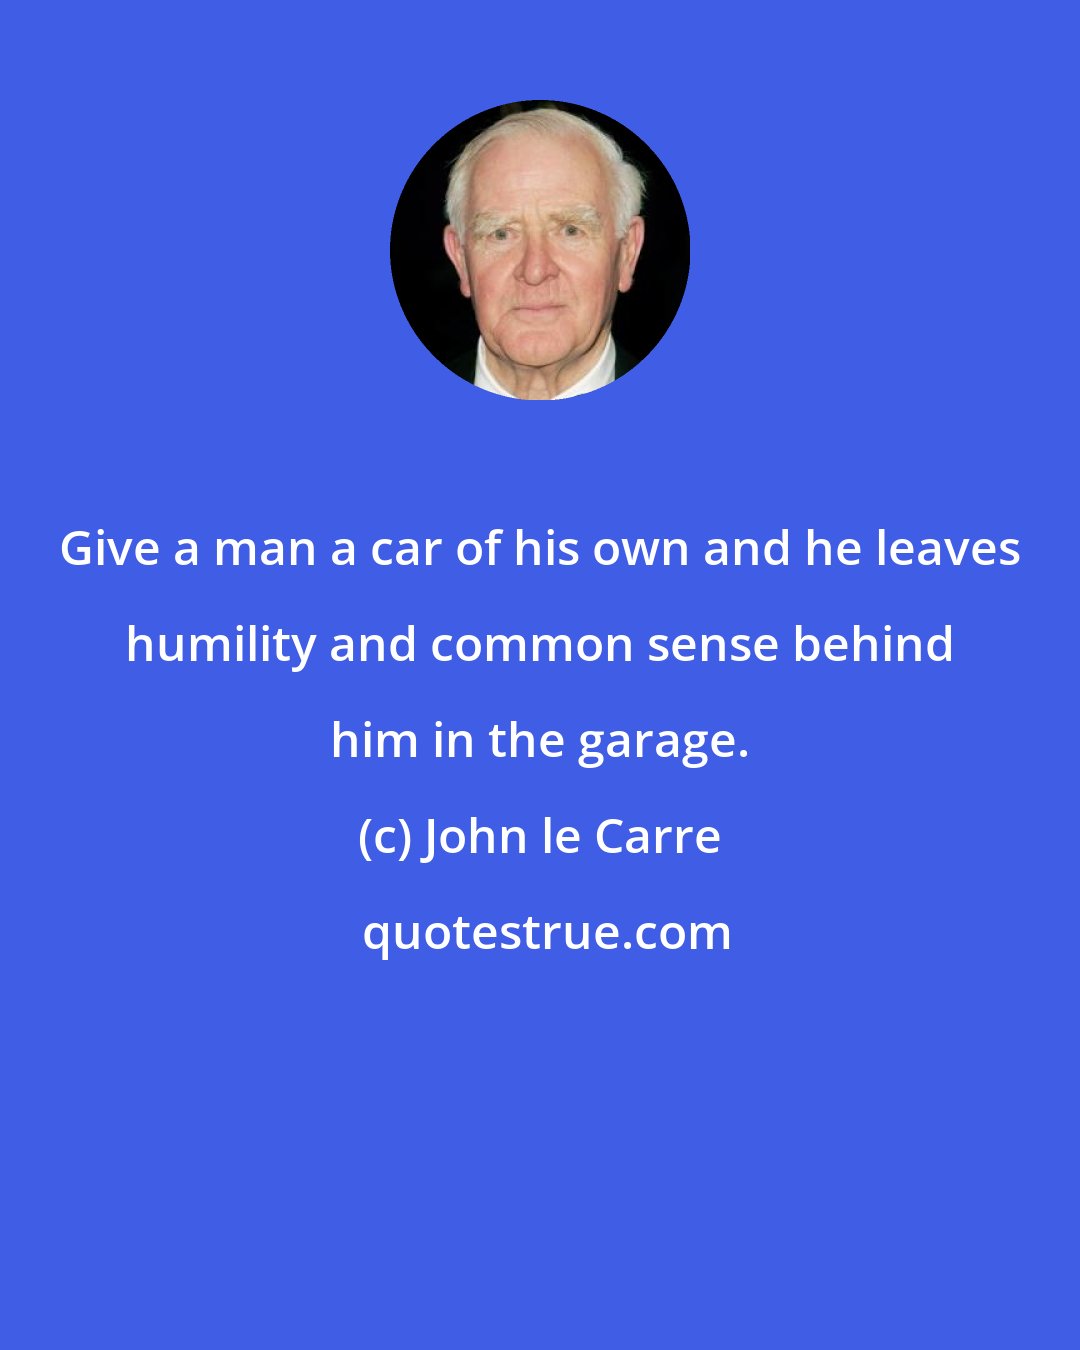 John le Carre: Give a man a car of his own and he leaves humility and common sense behind him in the garage.